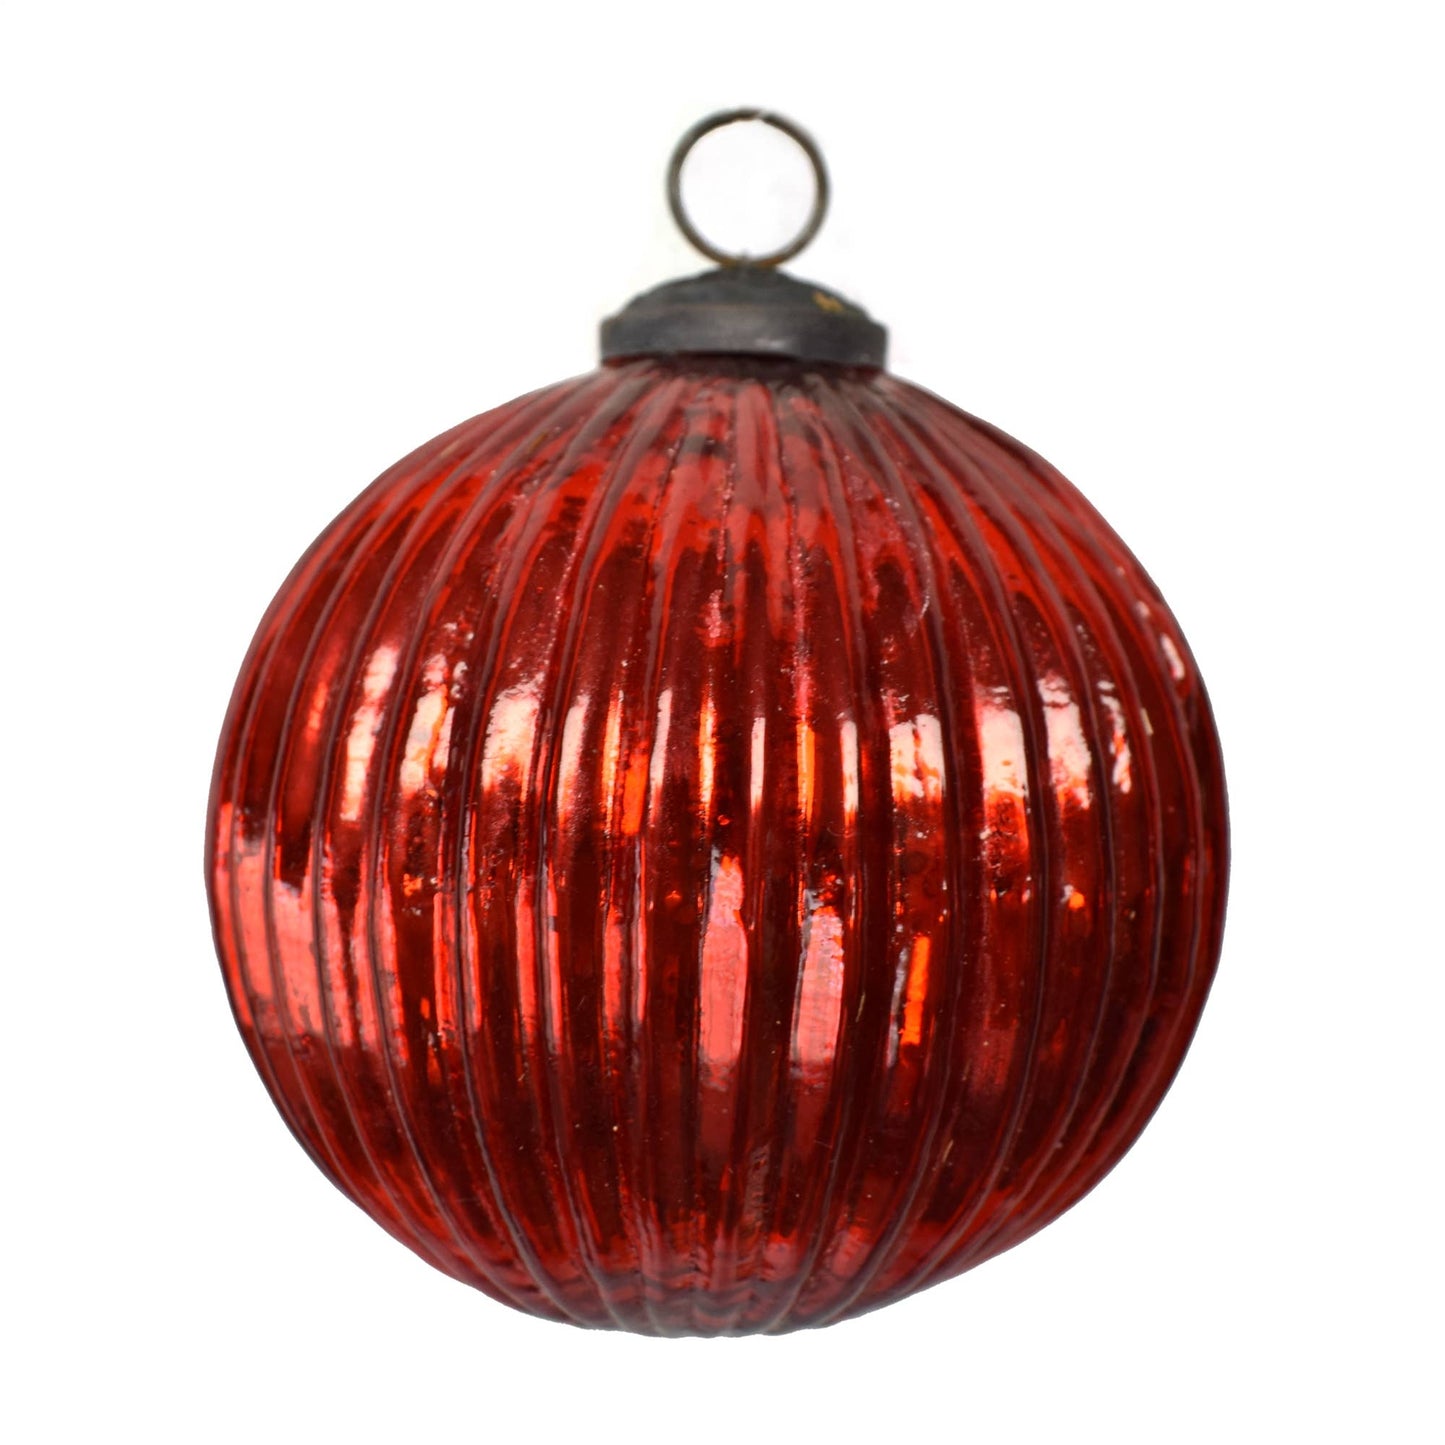 Hammered Glass Ornament 4" Red